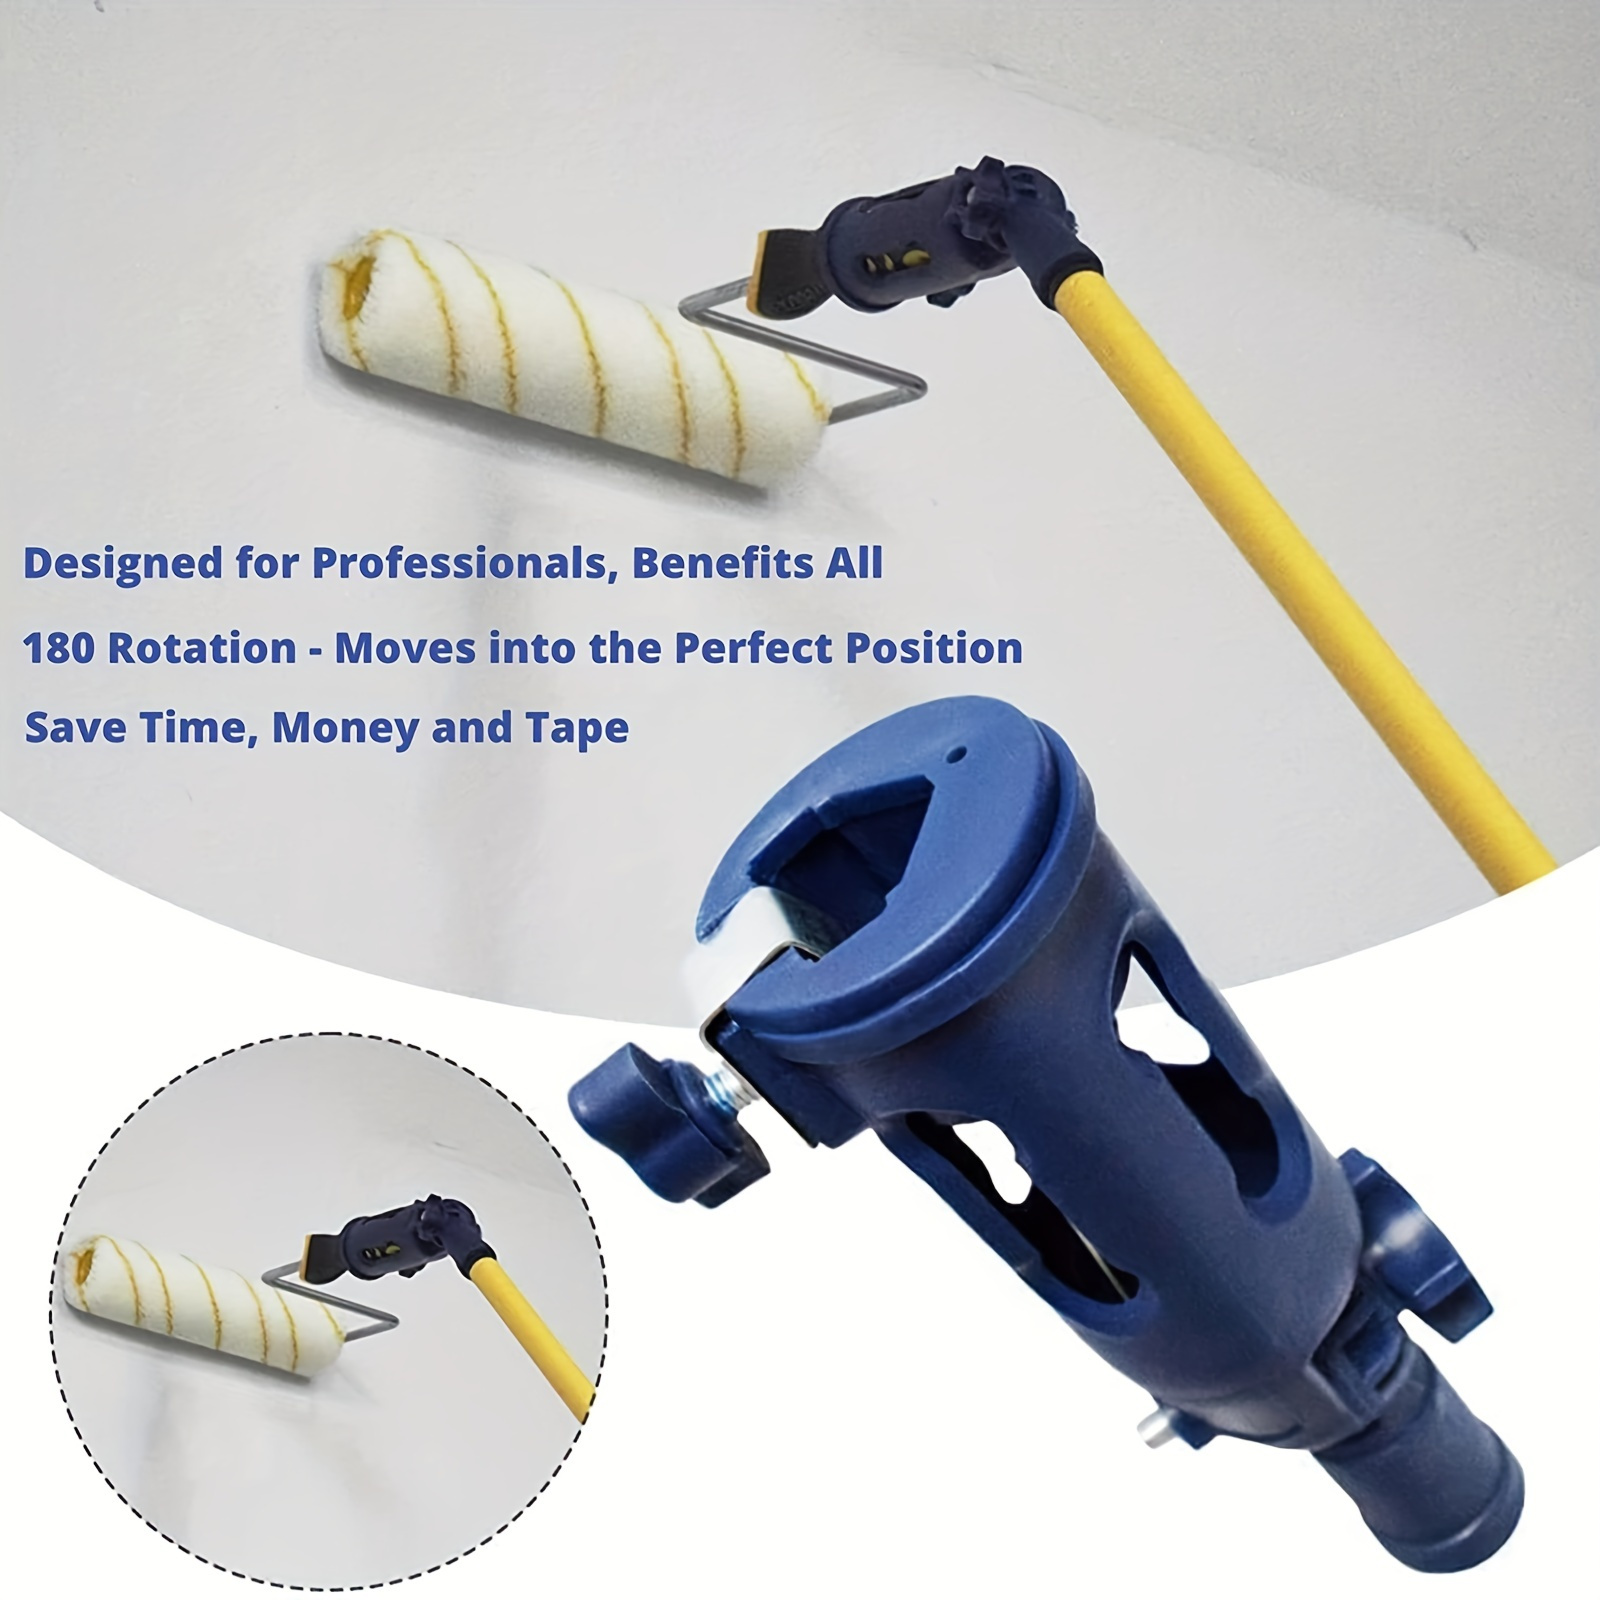 

1pc Multi-angle Adjustable Paint Brush Extender - Perfect For Painting Walls, High Ceilings, Decorations, Edges, And Corners - Paint Roller Extension Pole For Cutting And Cleaning